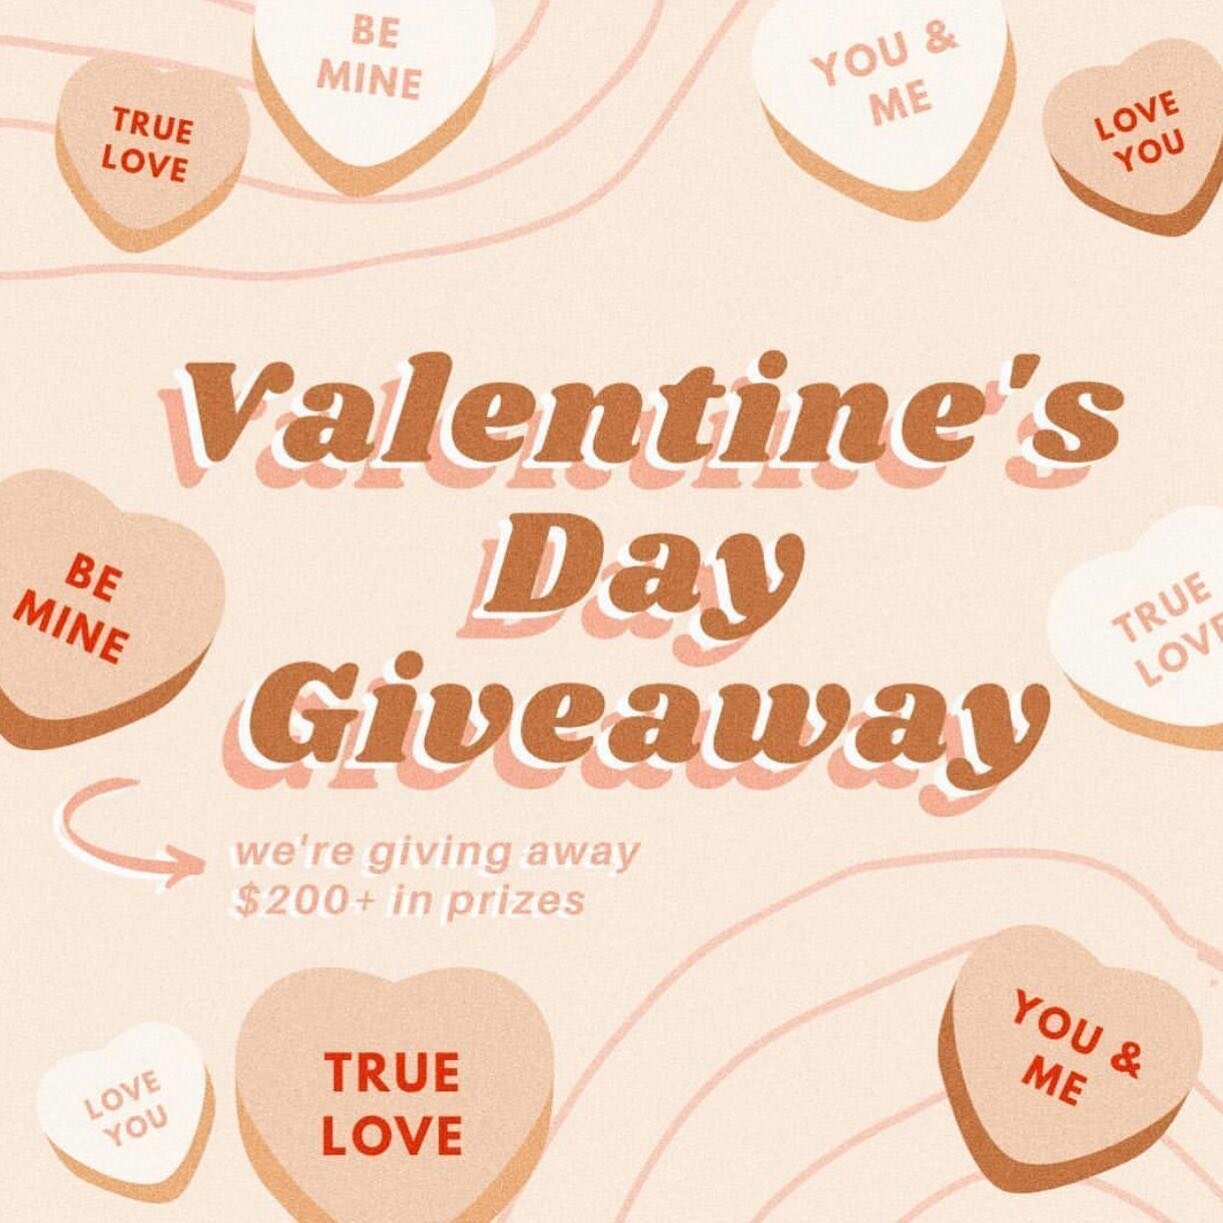 ☆ GIVEAWAY! ☆

I have partnered up with some amazing local businesses to give one lucky Austinite the opportunity to win the ultimate Valentine/Galentine giveaway bundle (valued over $200)!! 😲
-----------------------------
If you win, you will recei